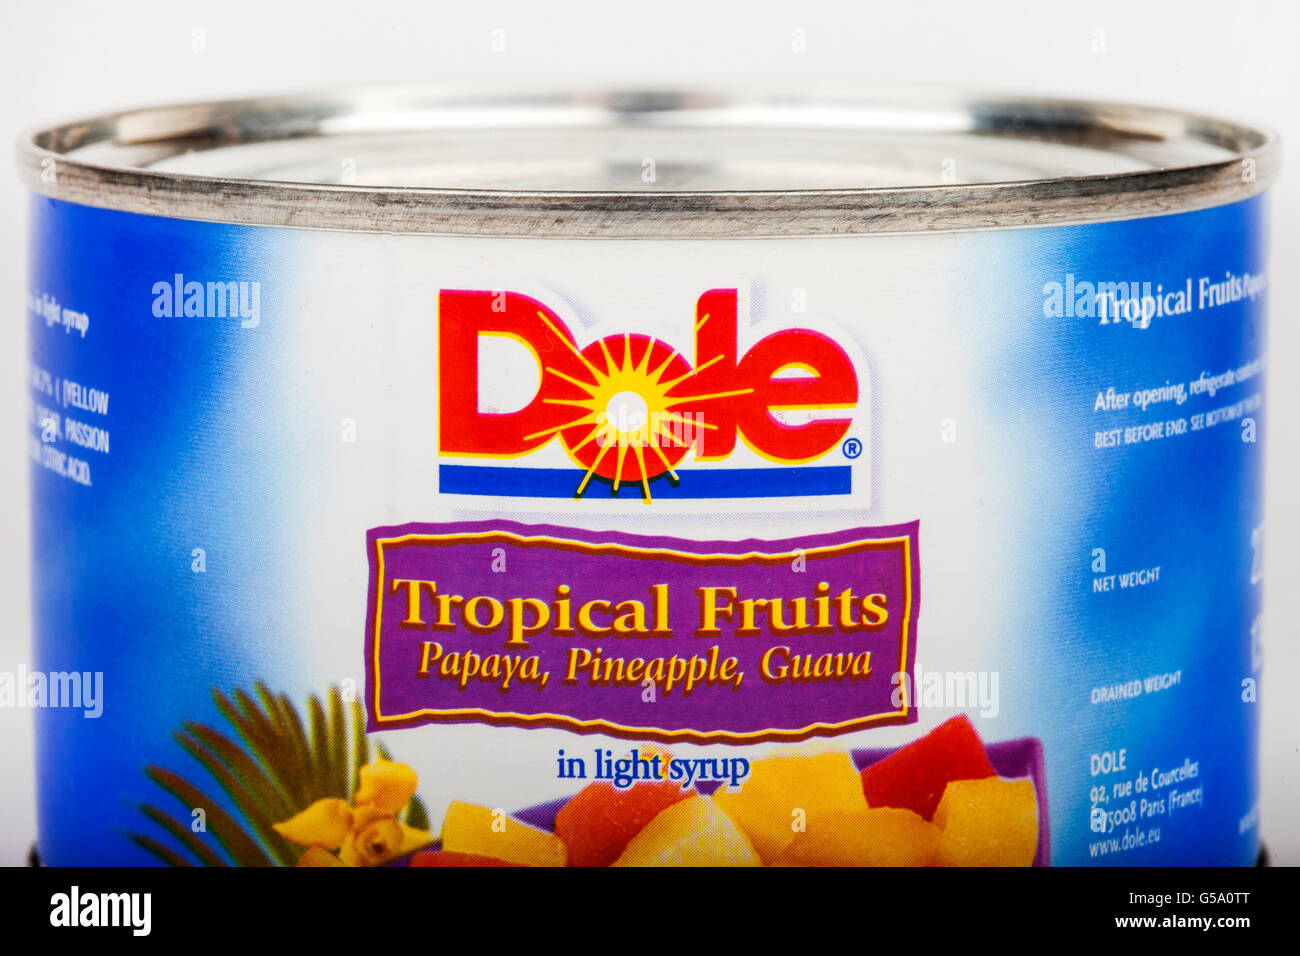 LONDON, UK - JUNE 16TH 2016: A tin of Tropical Fruit in Light Syrup produced by Dole Food Company, taken on 16th June 2016. Dole Stock Photo